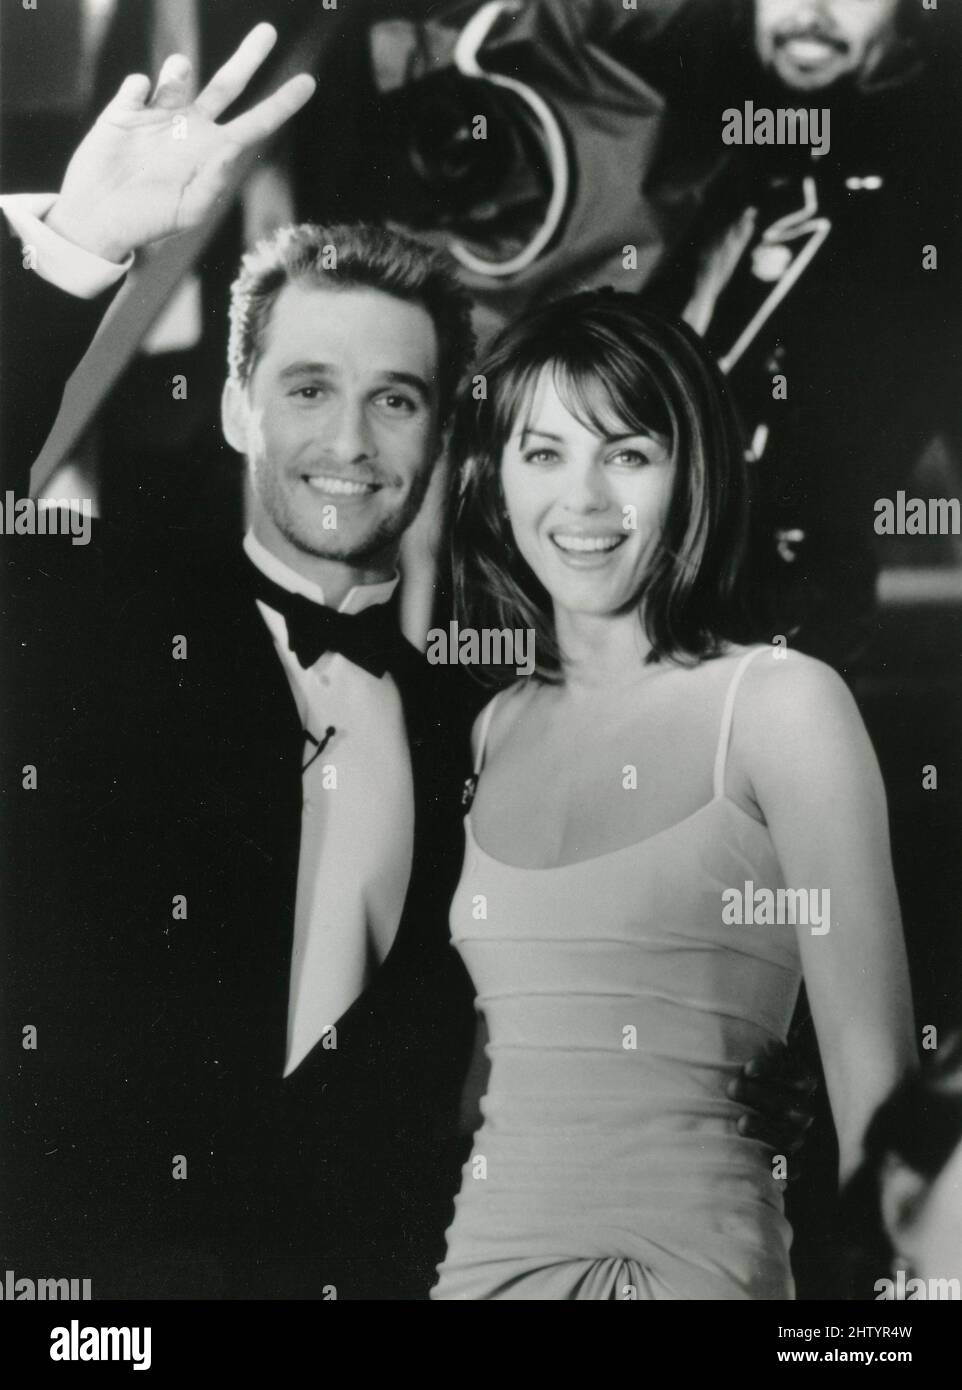 American actor Matthew McConaughey and Elizabeth Hurley in the movie Edtv, USA 1999 Stock Photo